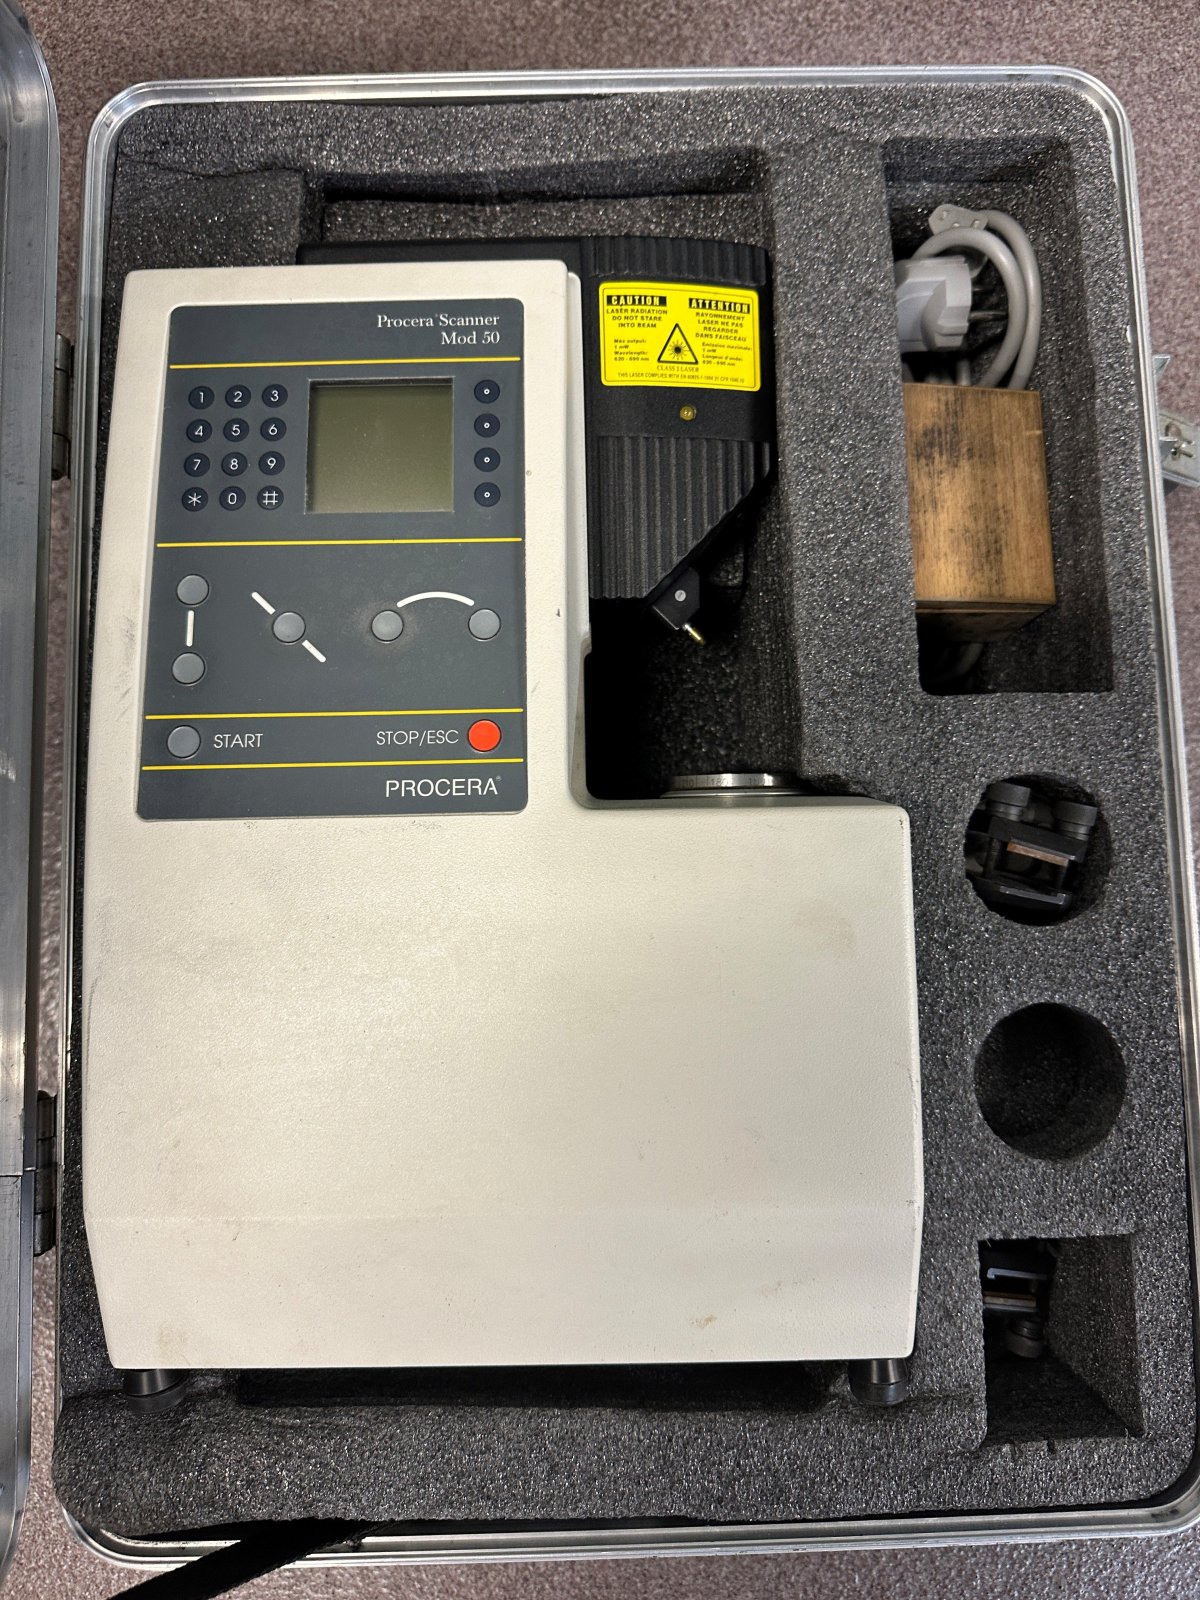 During a search of the vehicle, a piece of specialty equipment, a "Procera Scanner Mod 50" in a large carrying case was found. Further investigation into the scanner indicates that it holds significant value and is used in the dental industry, however it’s origin remains unknown.